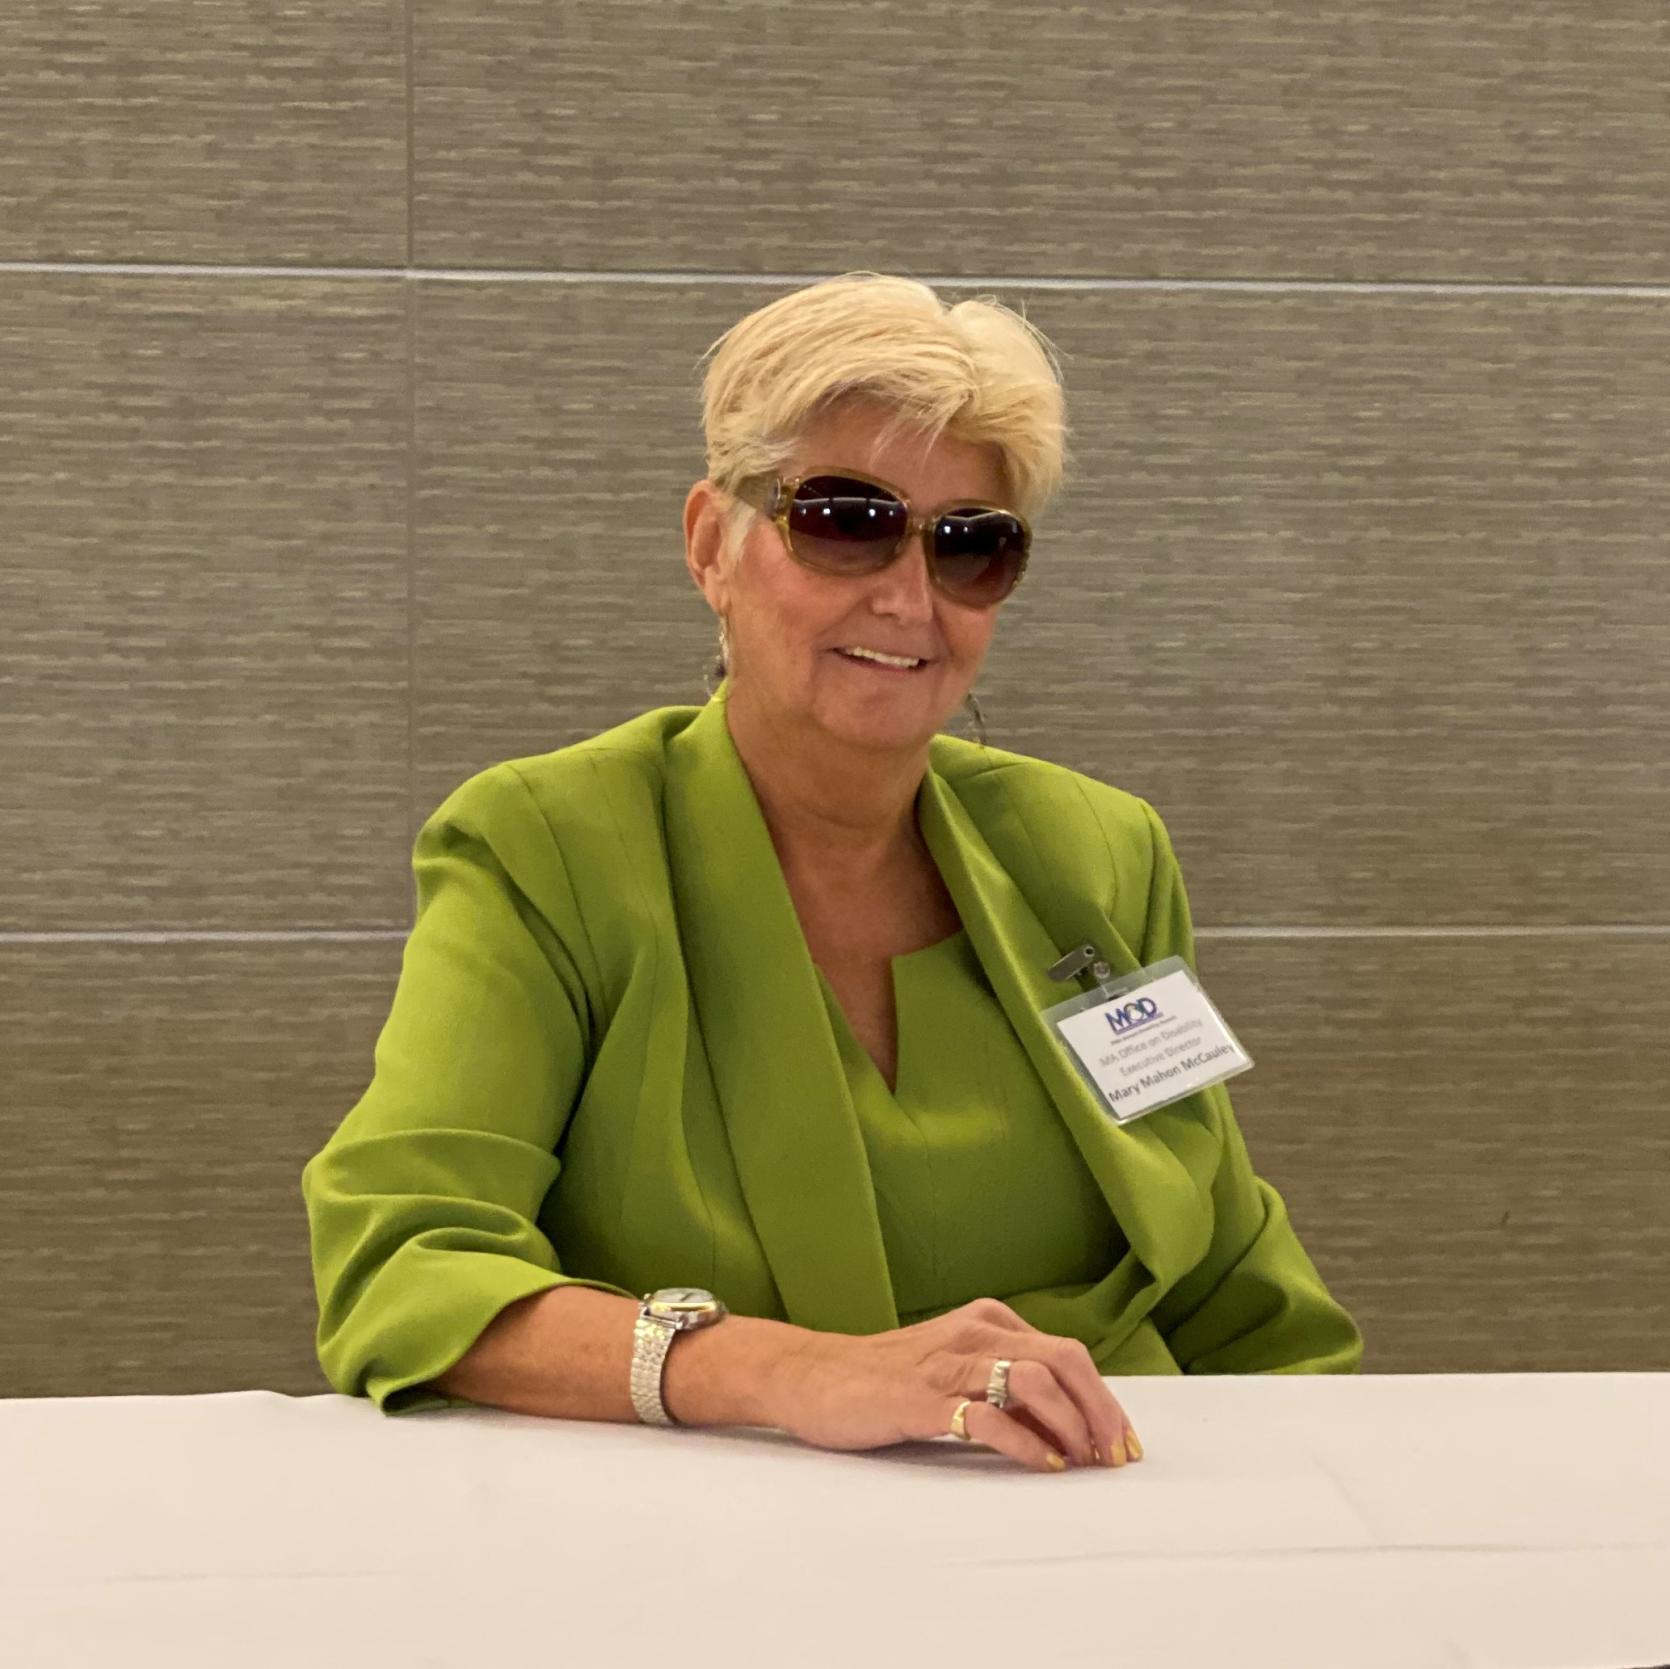 Mary Mahon McCauley, a White woman with short blonde hair, sits at the registration desk at an MOD event. She is wearing a green blouse and jacket. Her right hand is resting on the table and she is wearing a gold watch and rings. She is wearing brown sunglasses and smiling.